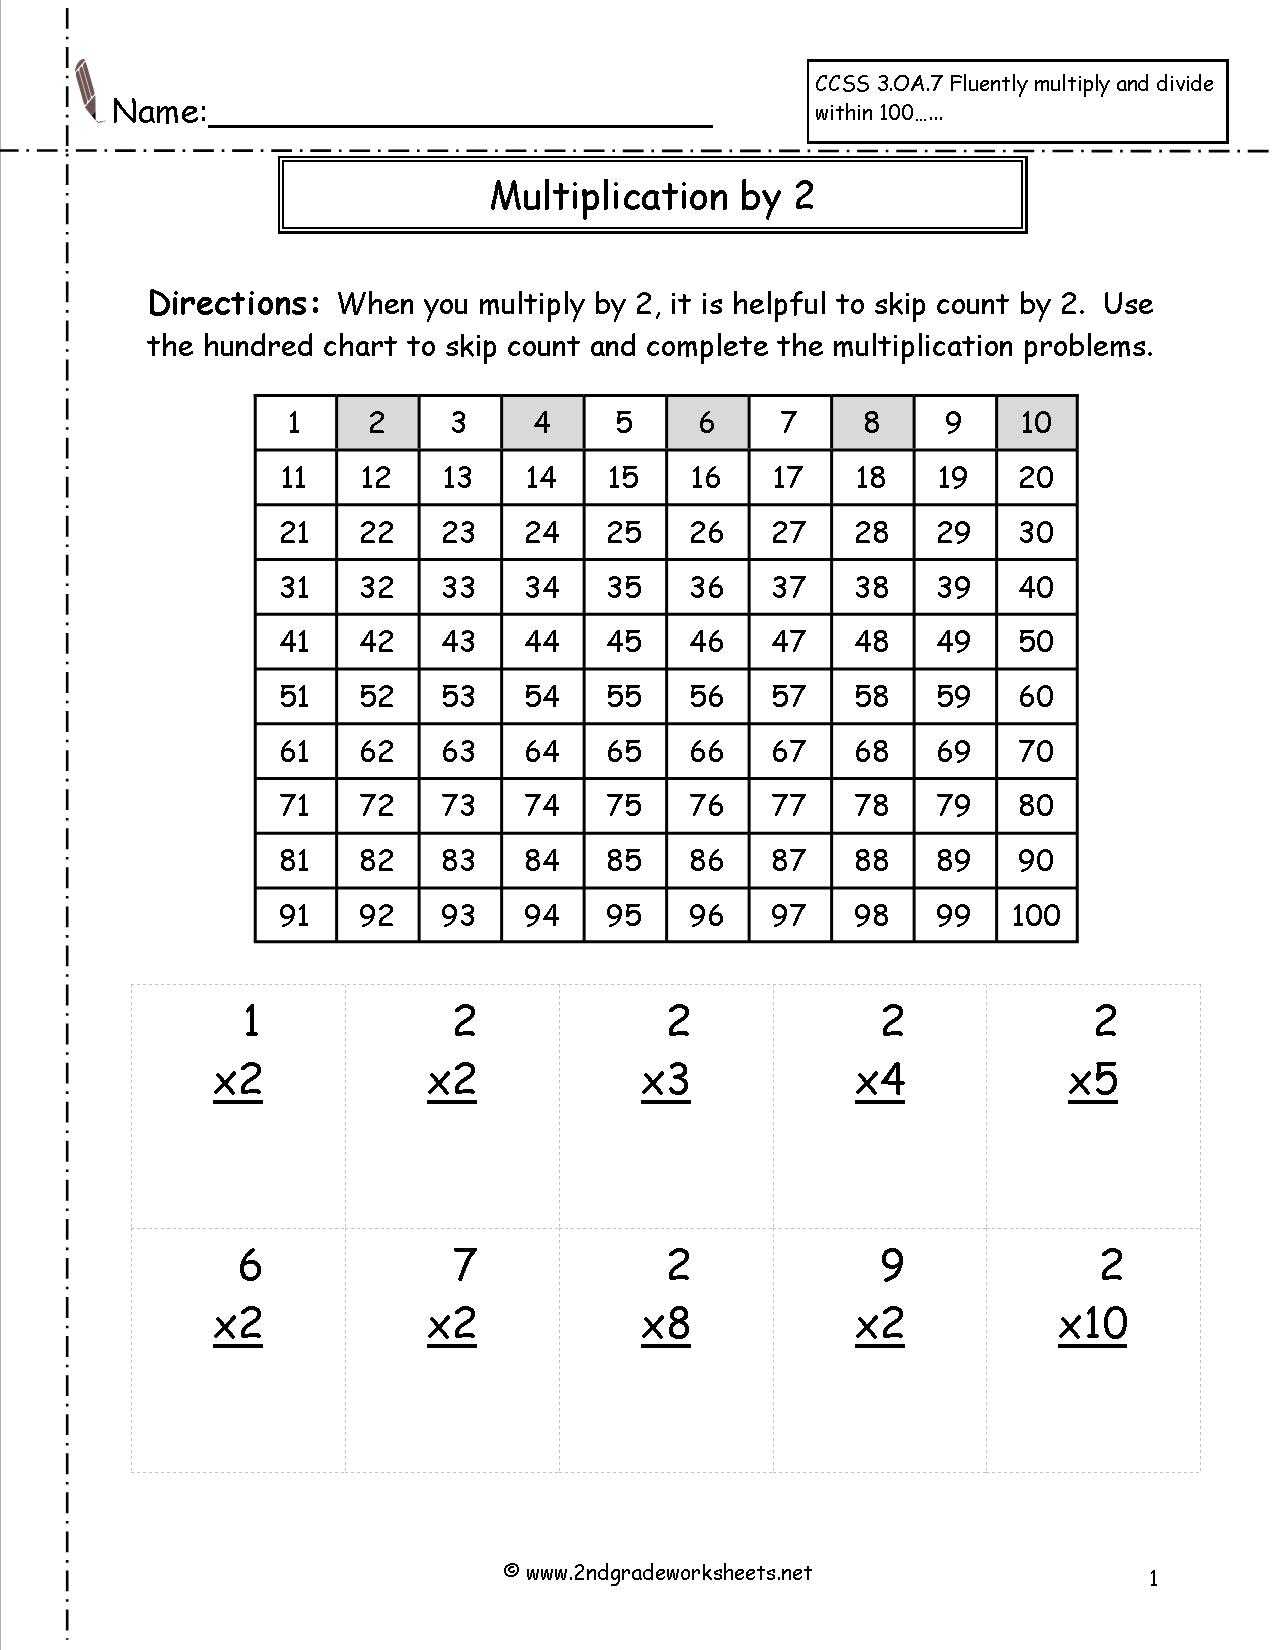 Times Tables Worksheets 1 12 Pdf with Exelent Math Fact Test Collection Math Worksheets Modopol